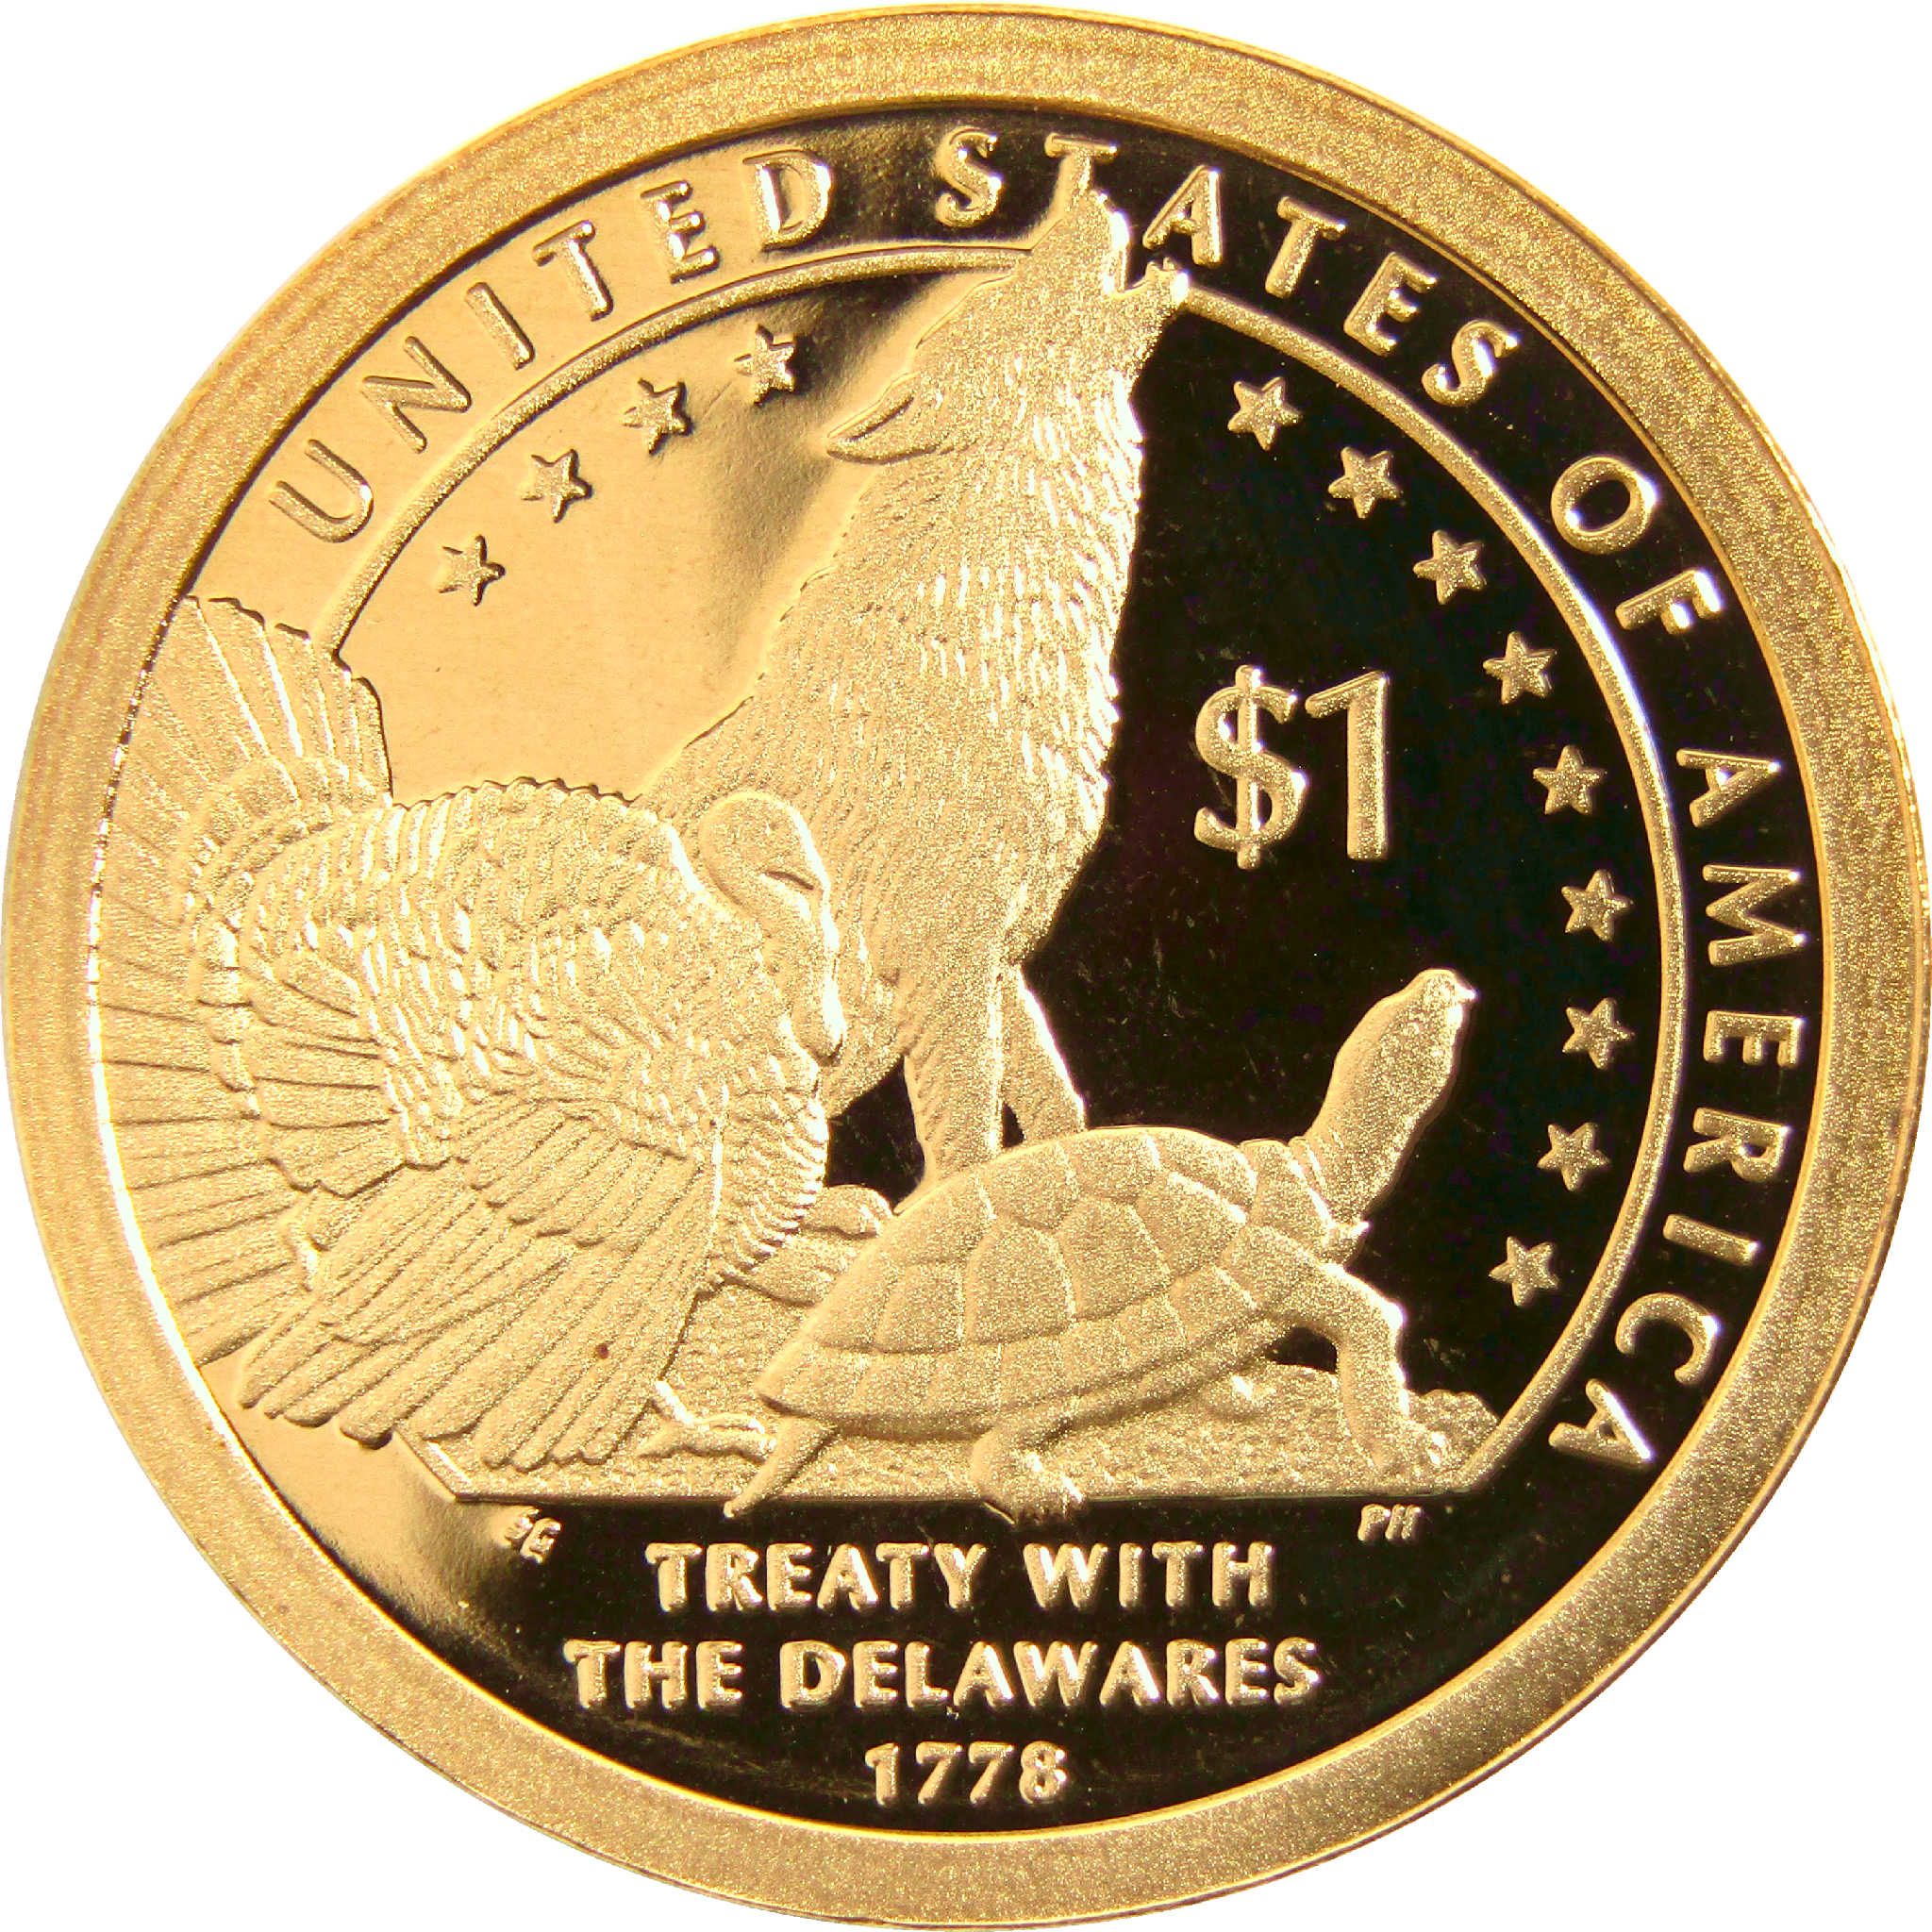 2013 S Treaty with the Delawares Native American Dollar Choice Proof